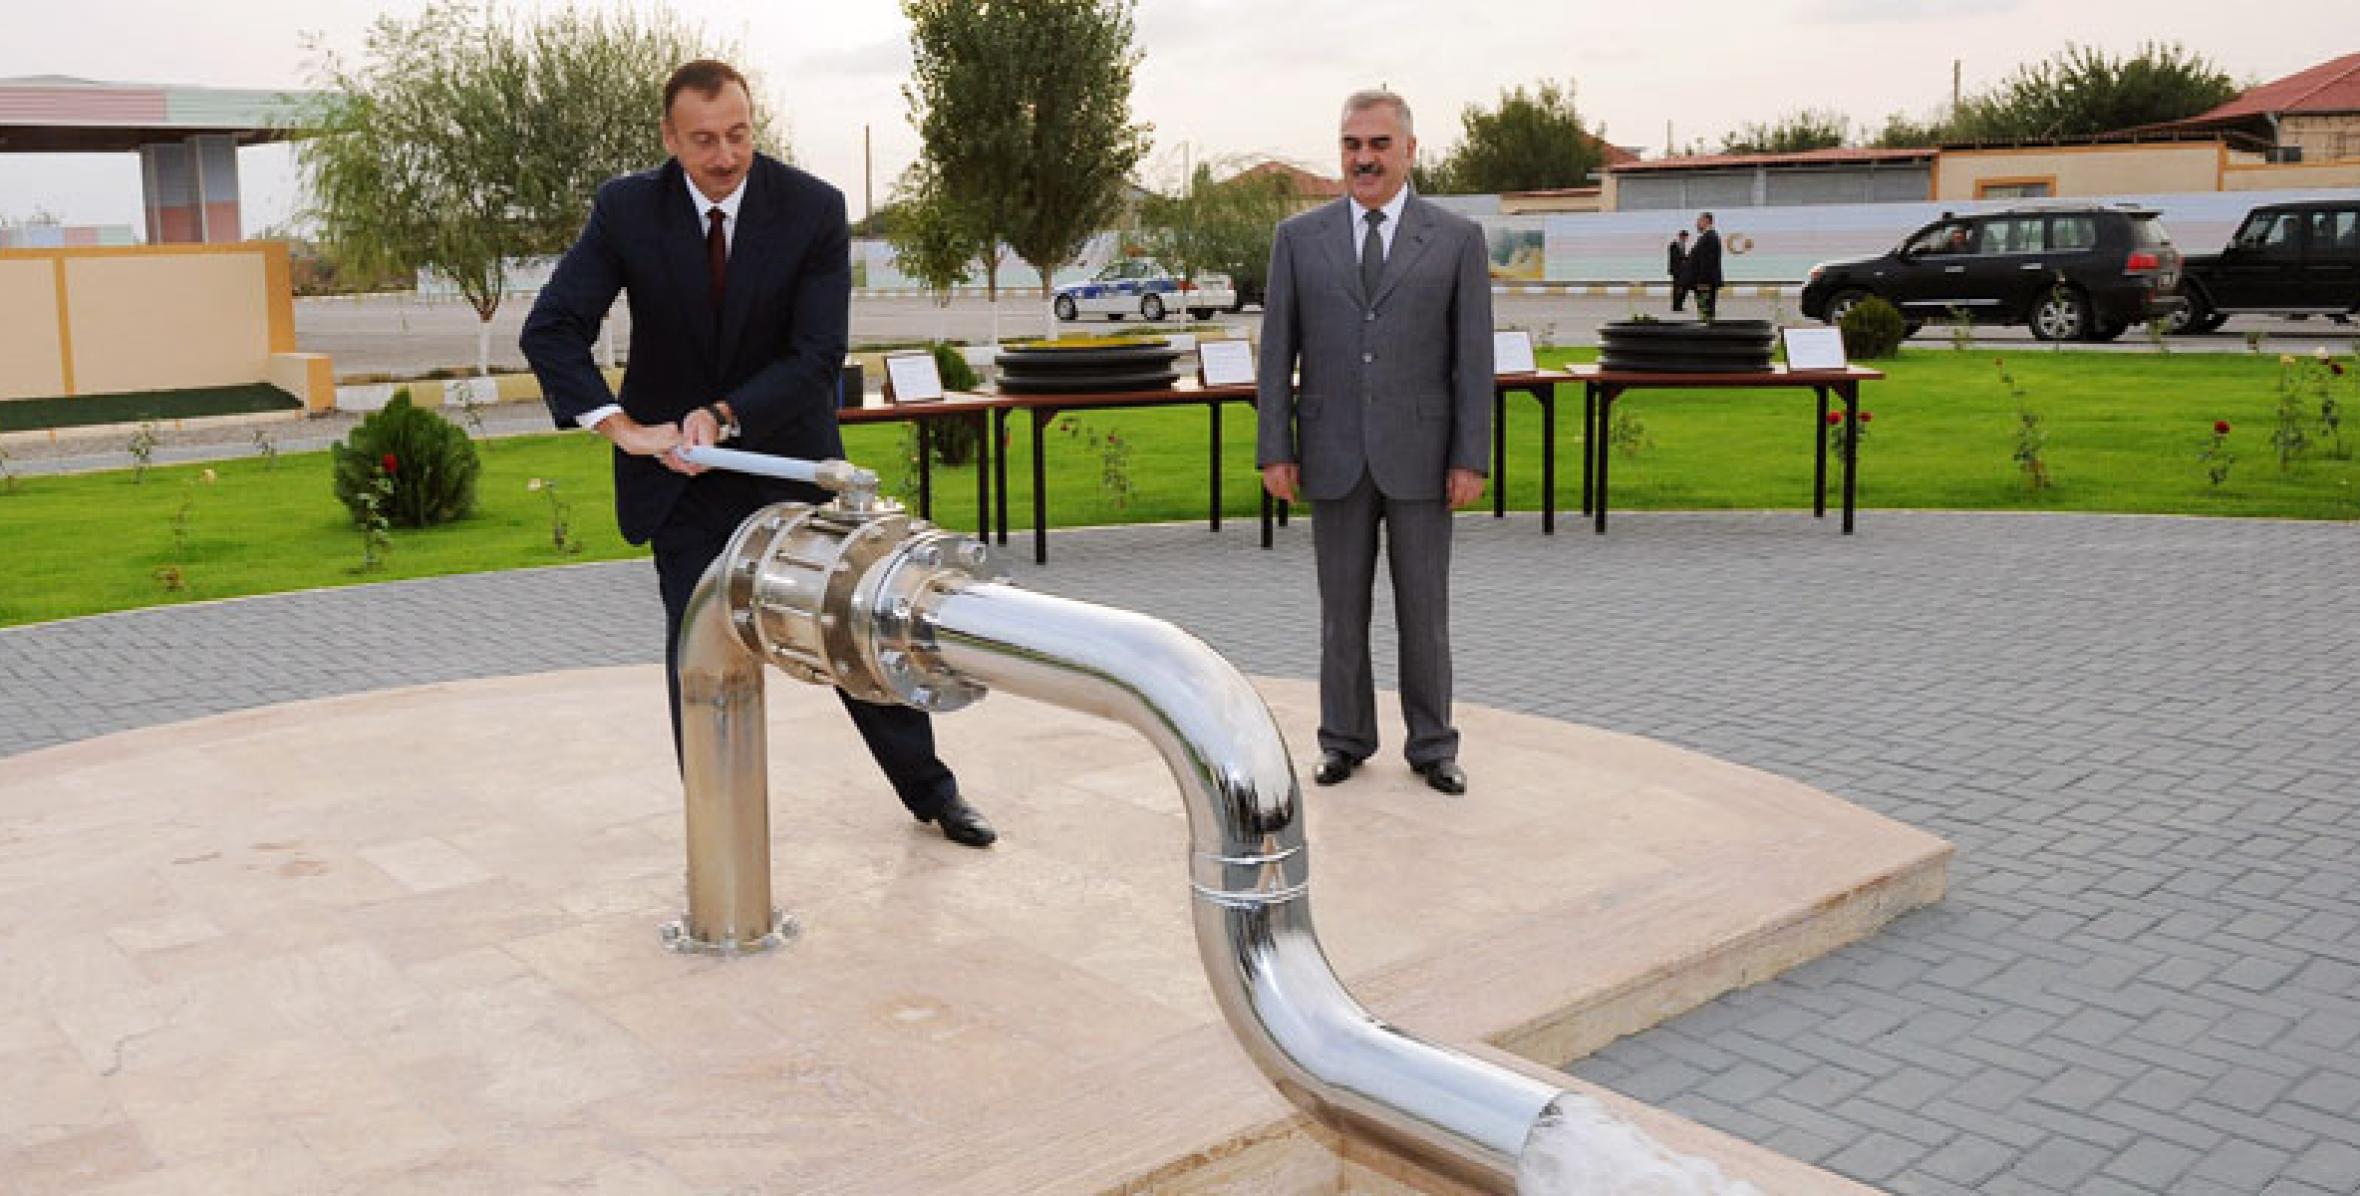 Ilham Aliyev attended a ceremony to commission a water systems distribution facility